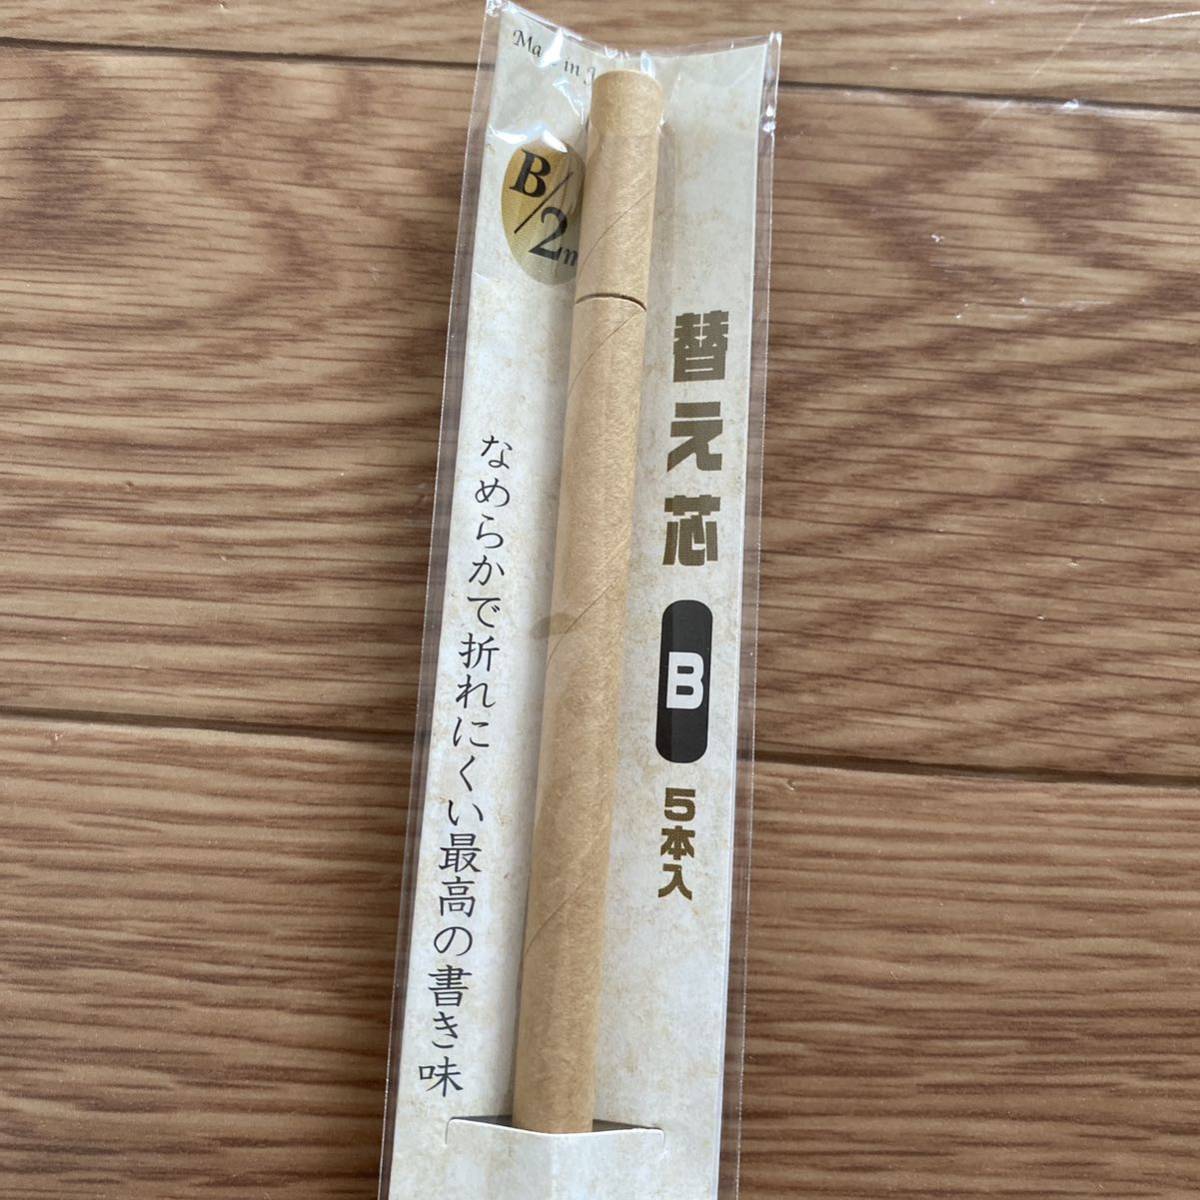  day text . large . north star pencil corporation spare lead B adult pencil series made in Japan new goods price cut 